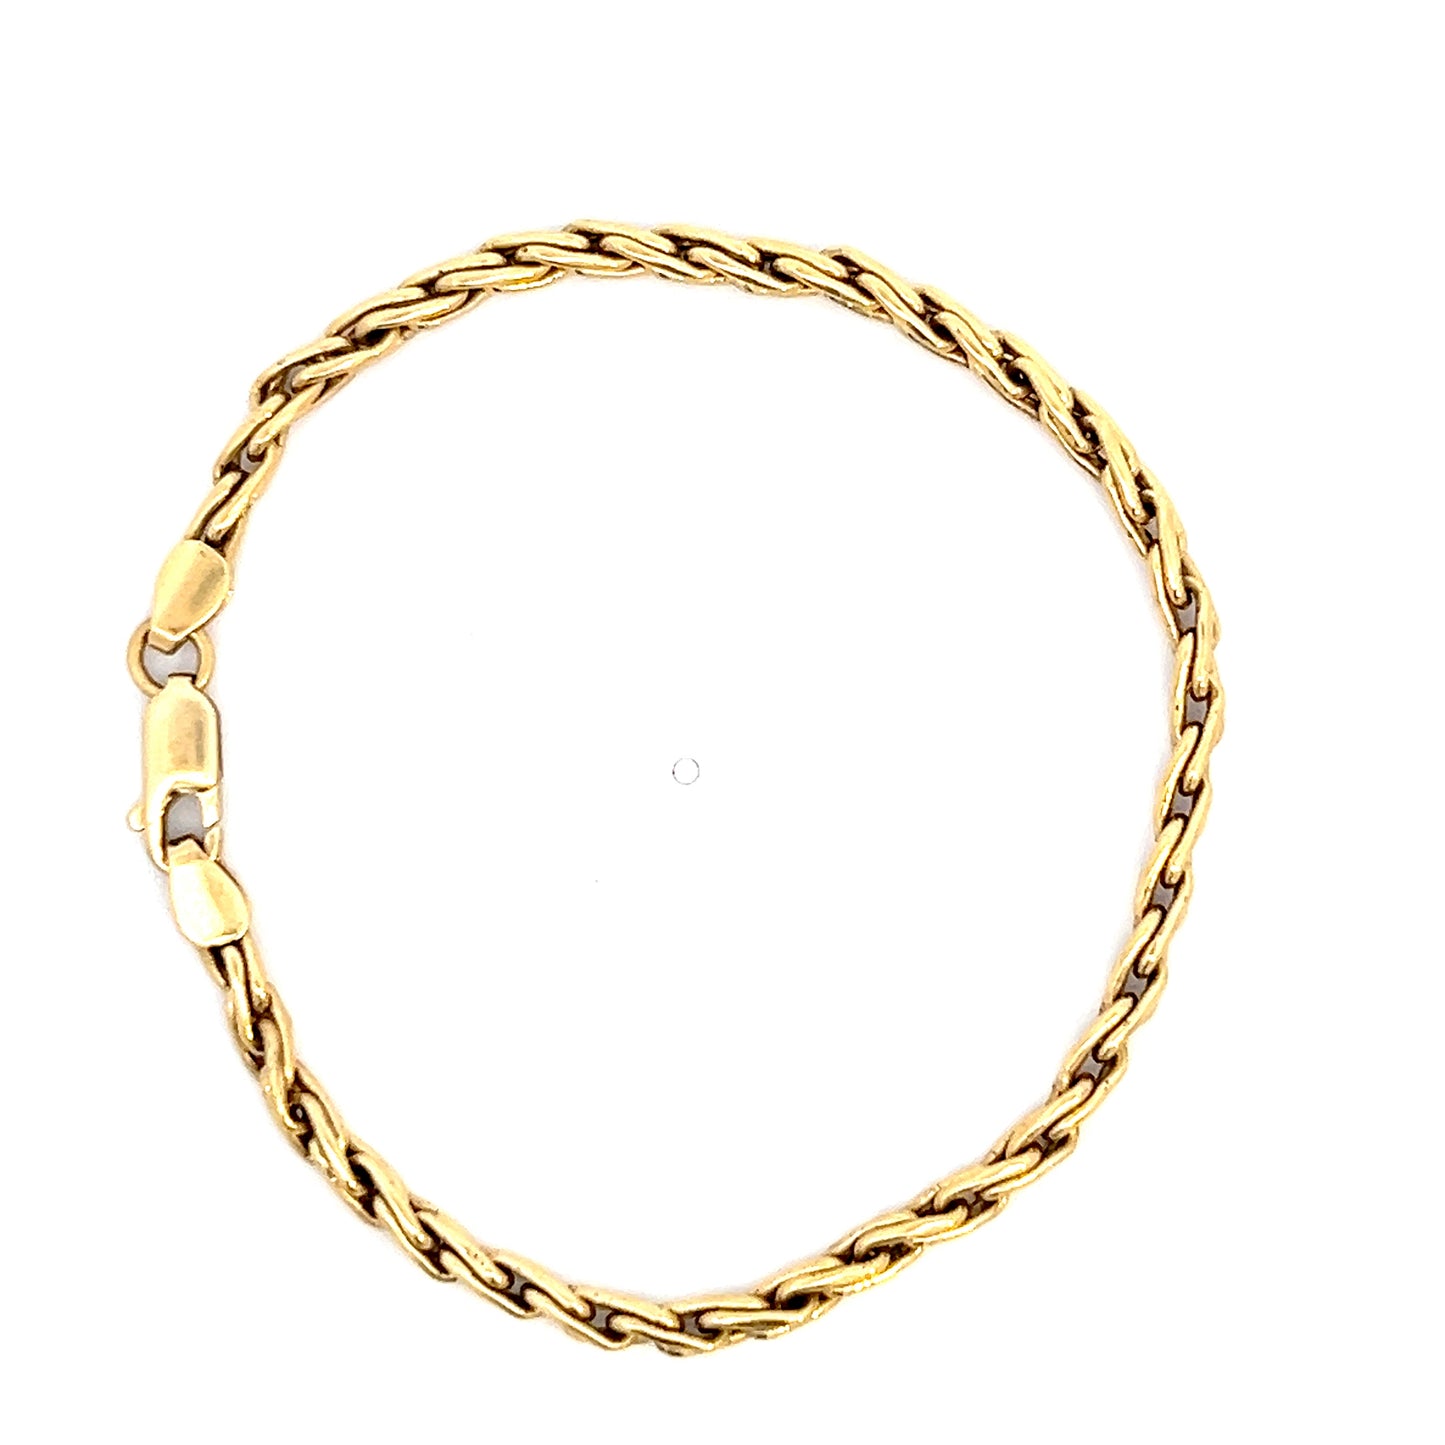 8" Cable Link Bracelet - 18k - Yellow Gold - 5.75g